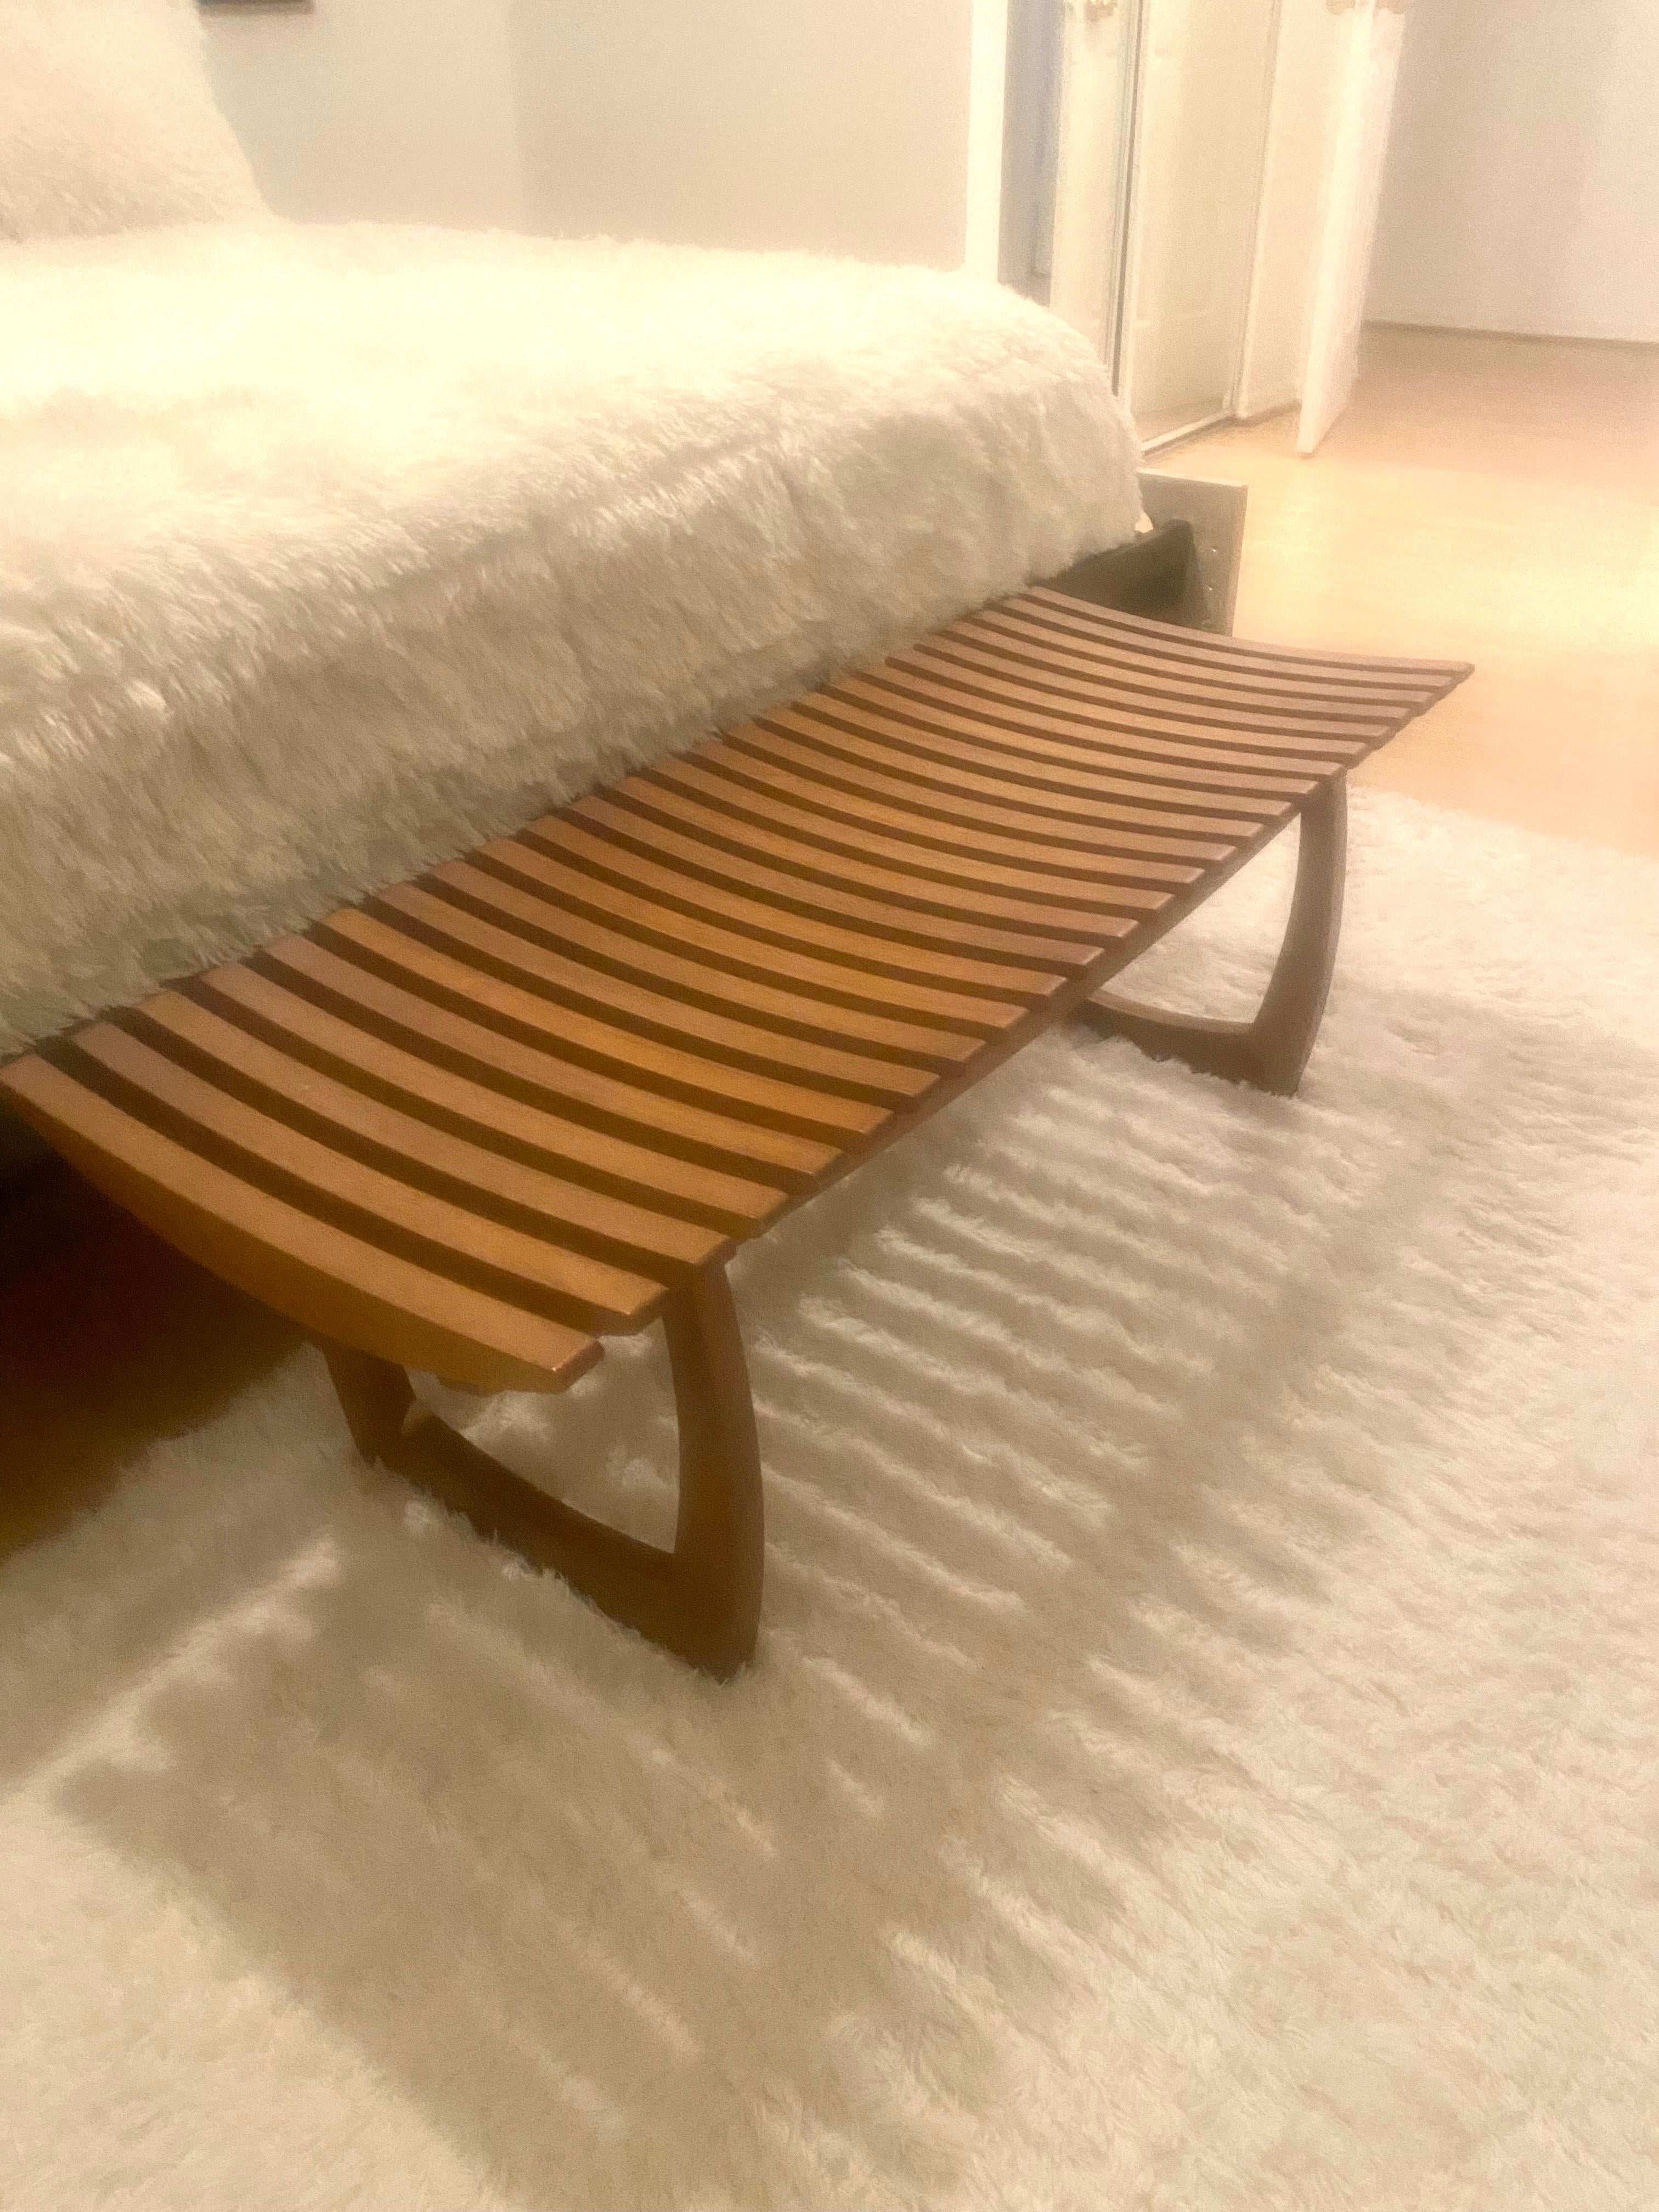 Mid- Century Modern Danish style curved and slatted wood bench. This piece can serve as a coffee table also.